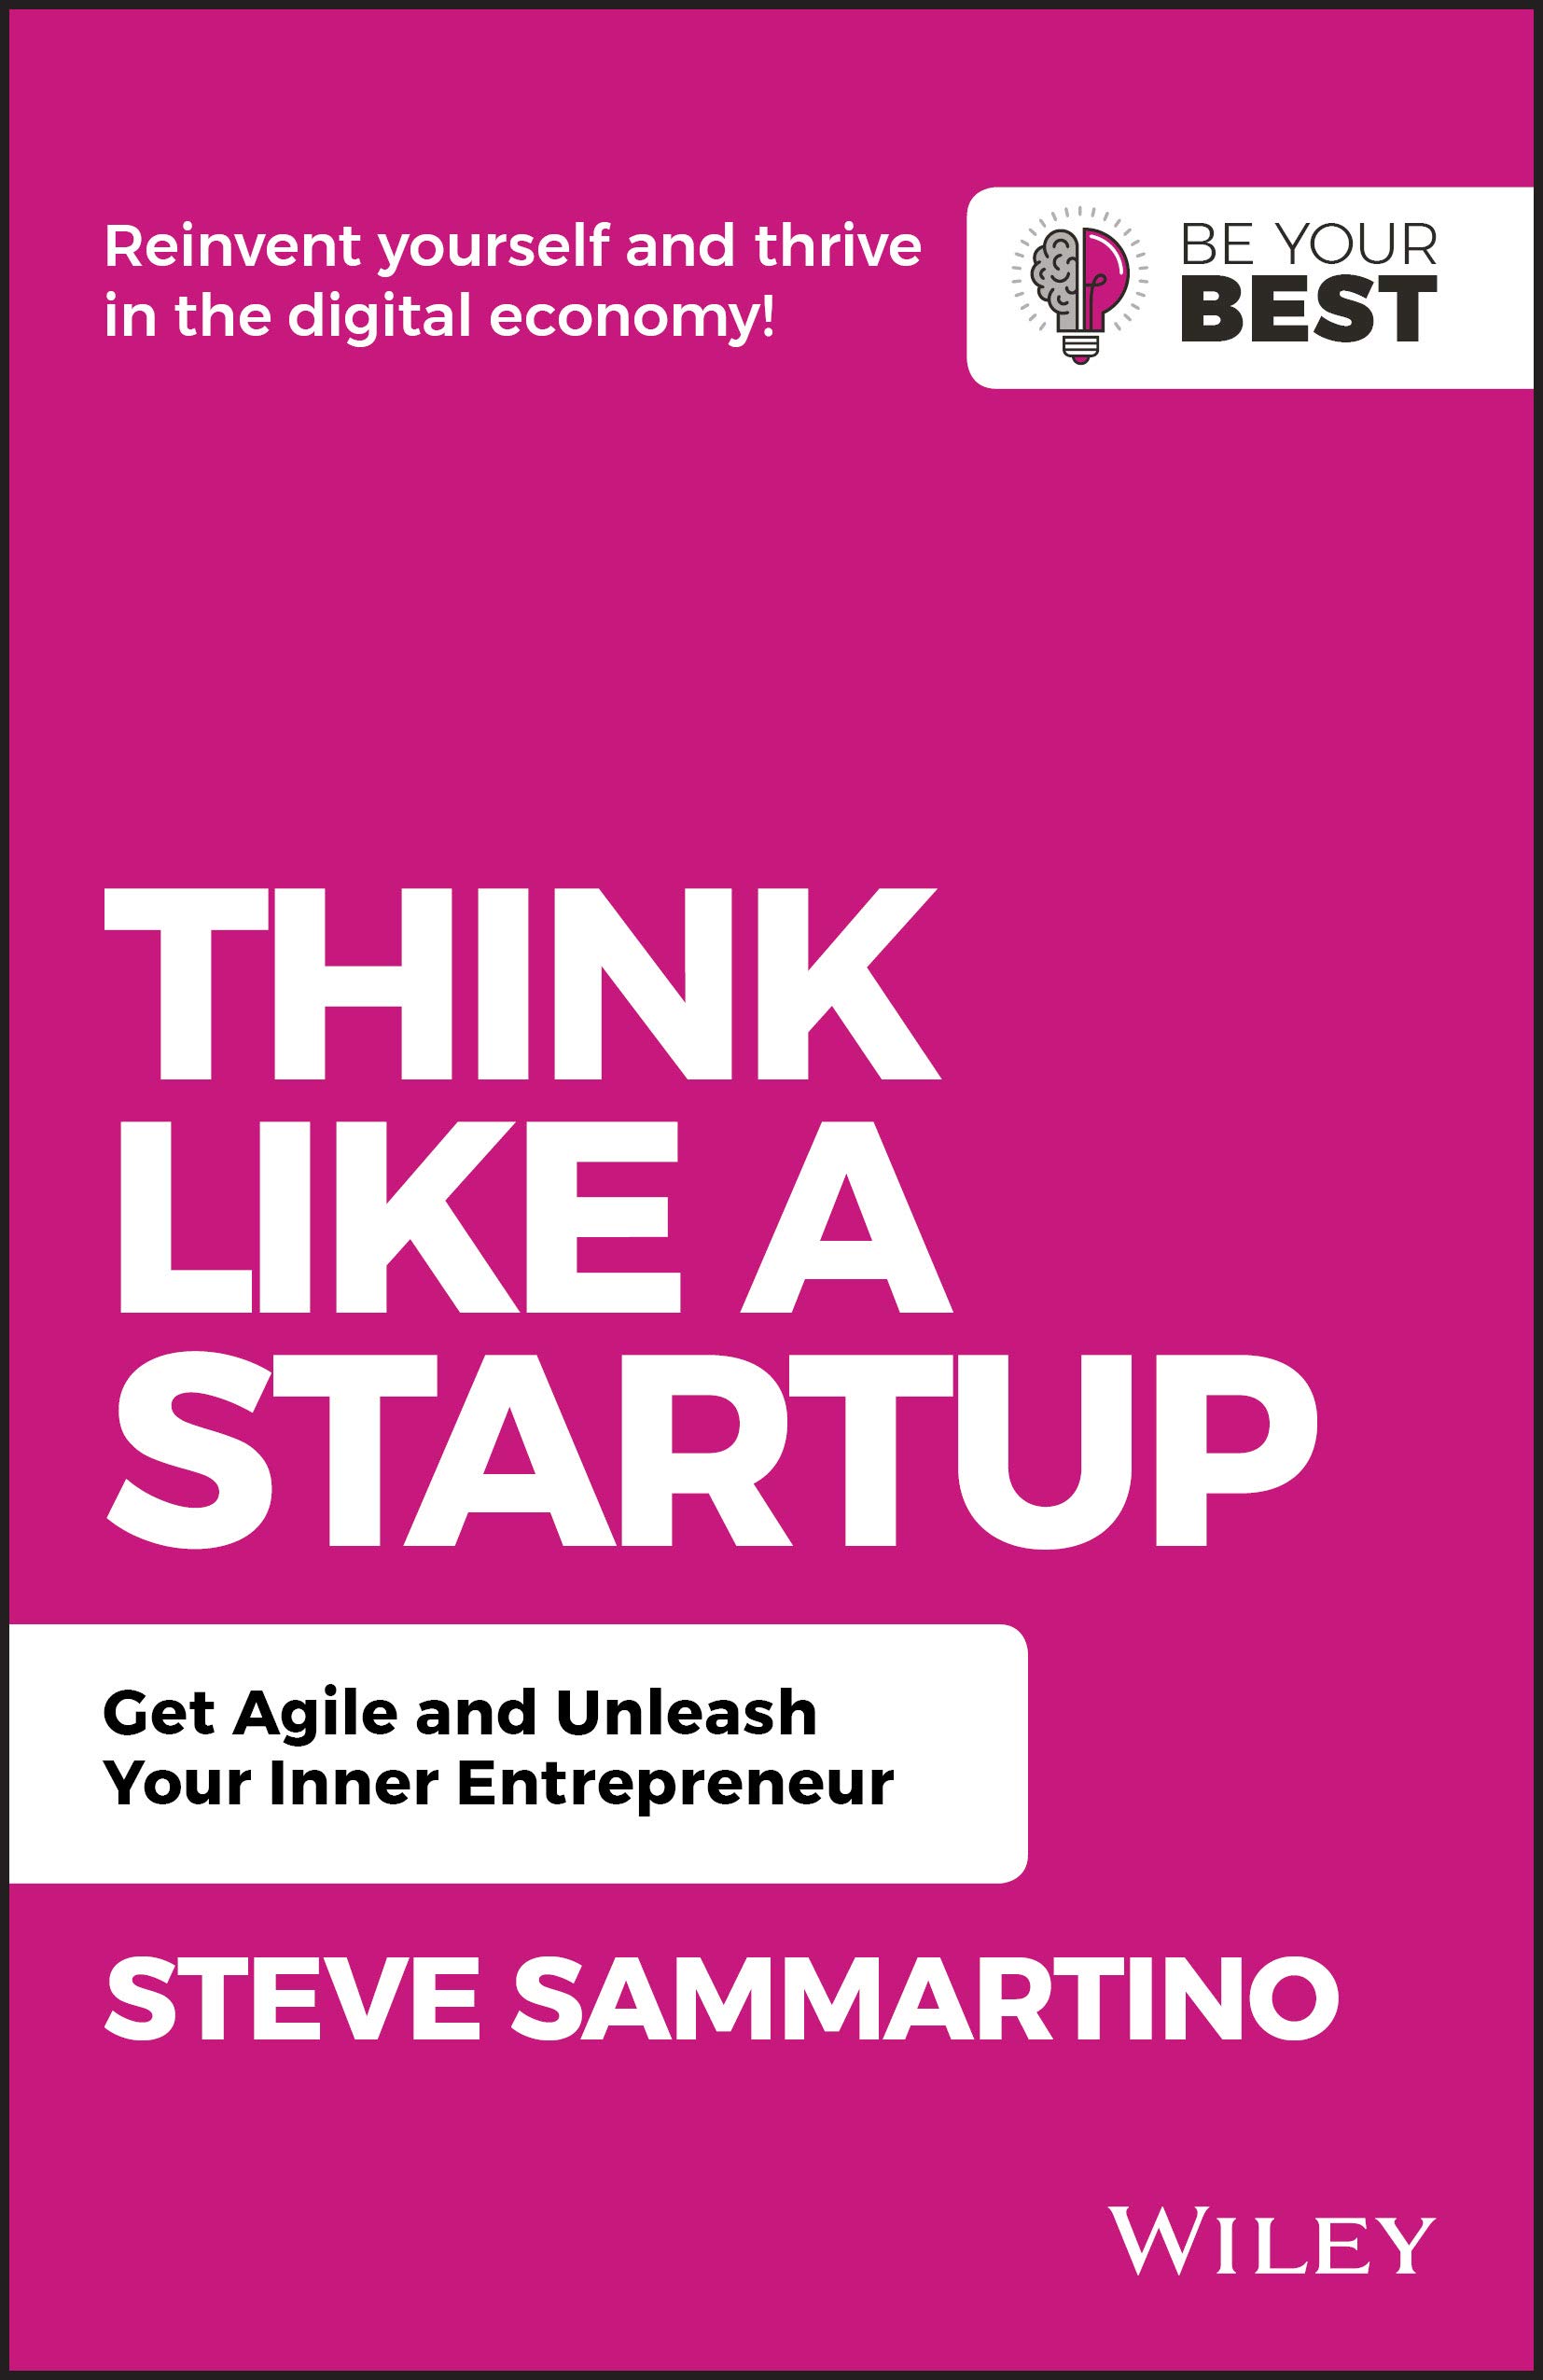 Think Like a Startup: Get Agile and Unleash Your Inner Entrepreneur (Be Your Best)